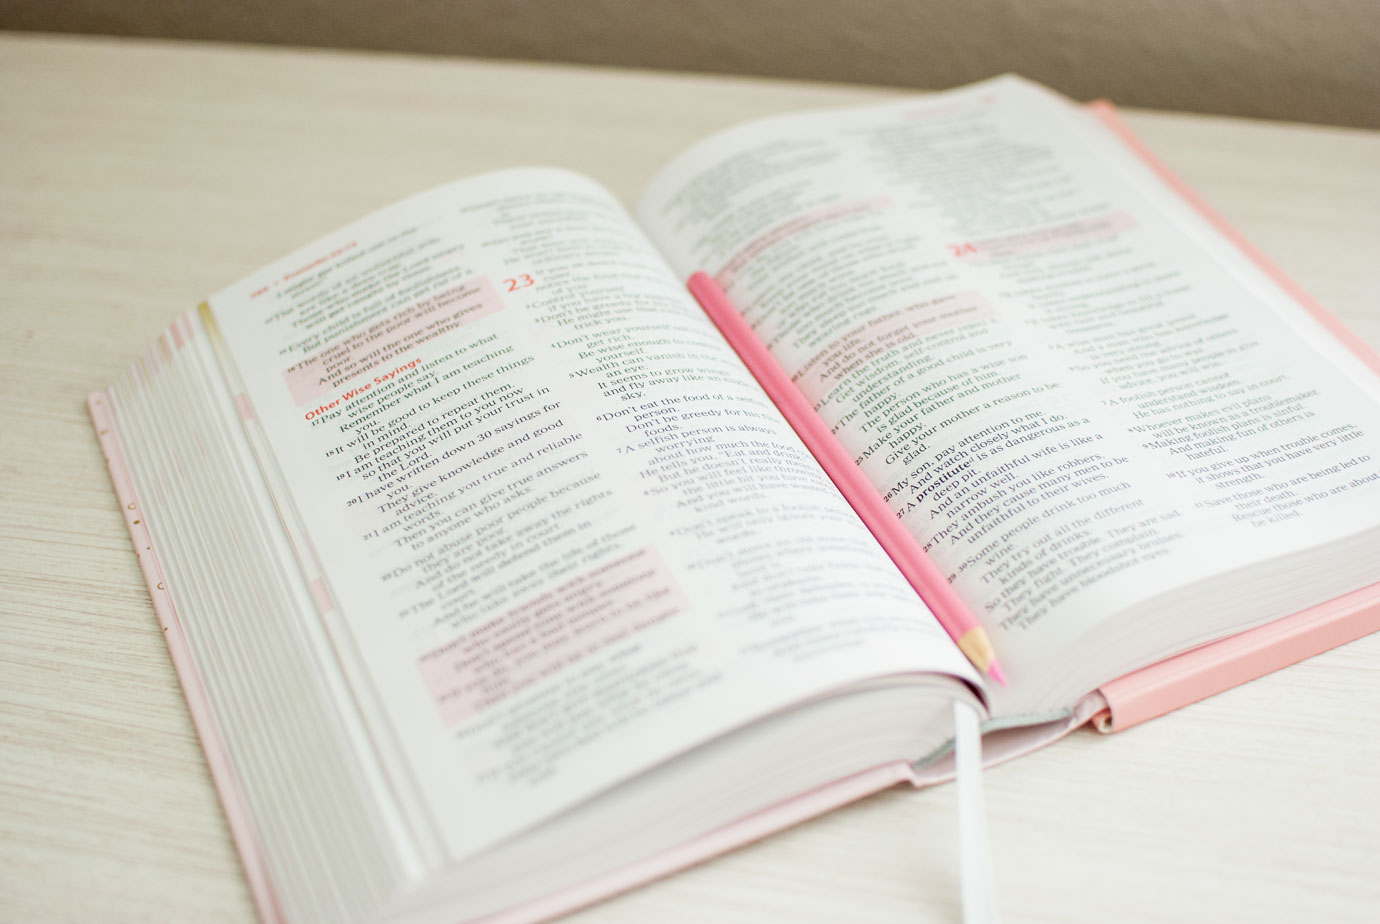 The ICB Prayer Bible For Children highlights scripture references to prayer #ICBPrayerBible